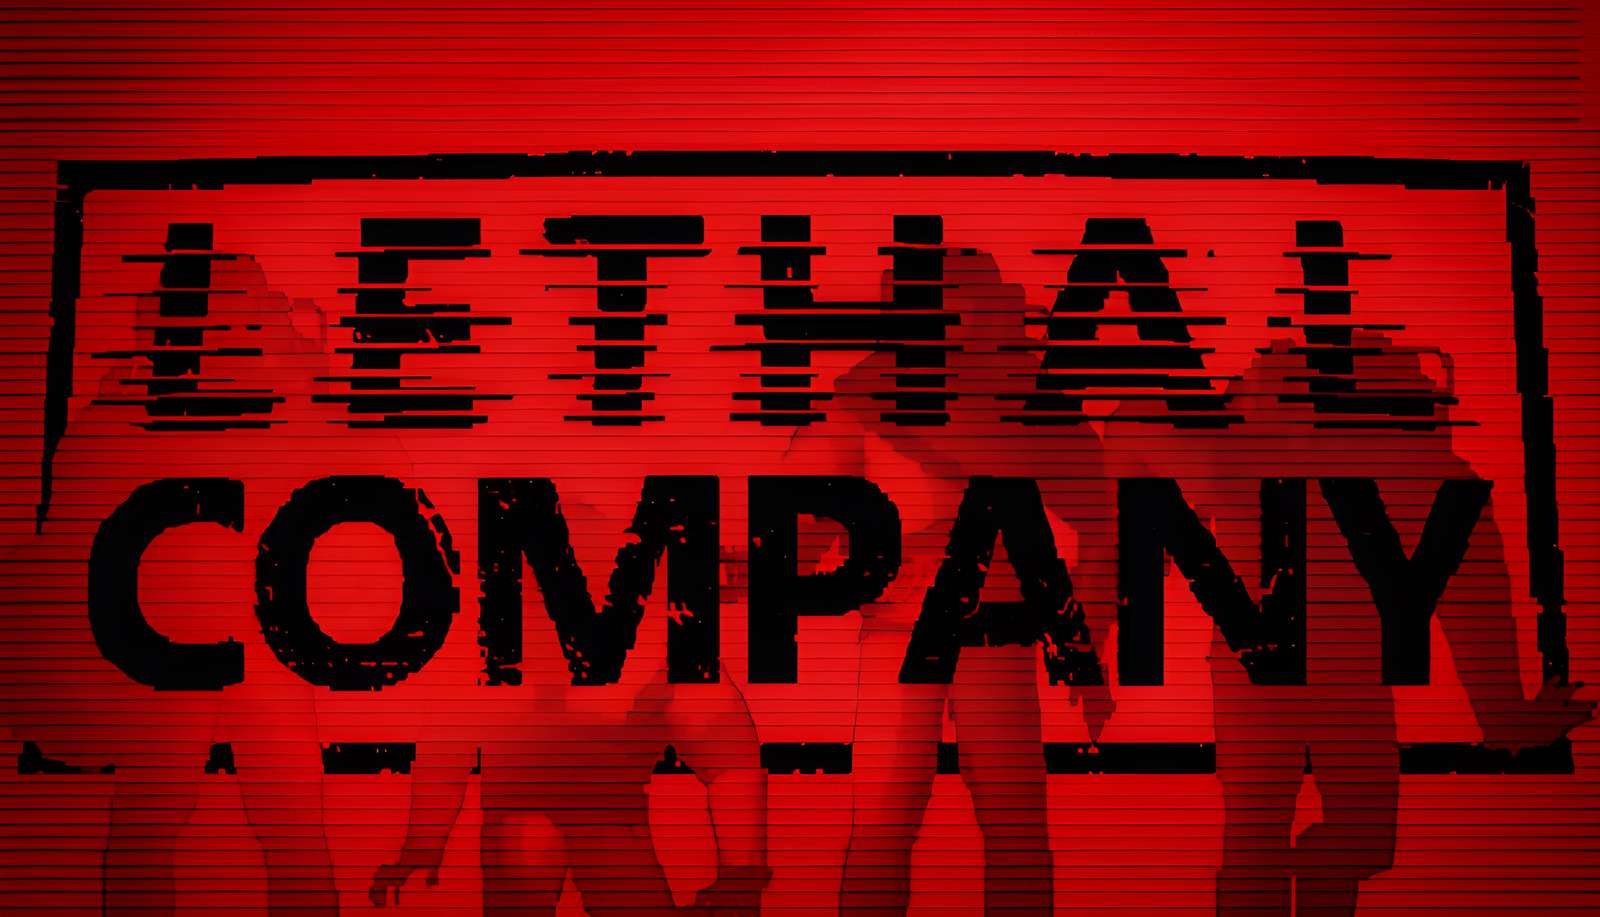 Lethal Company puzzle online from photo